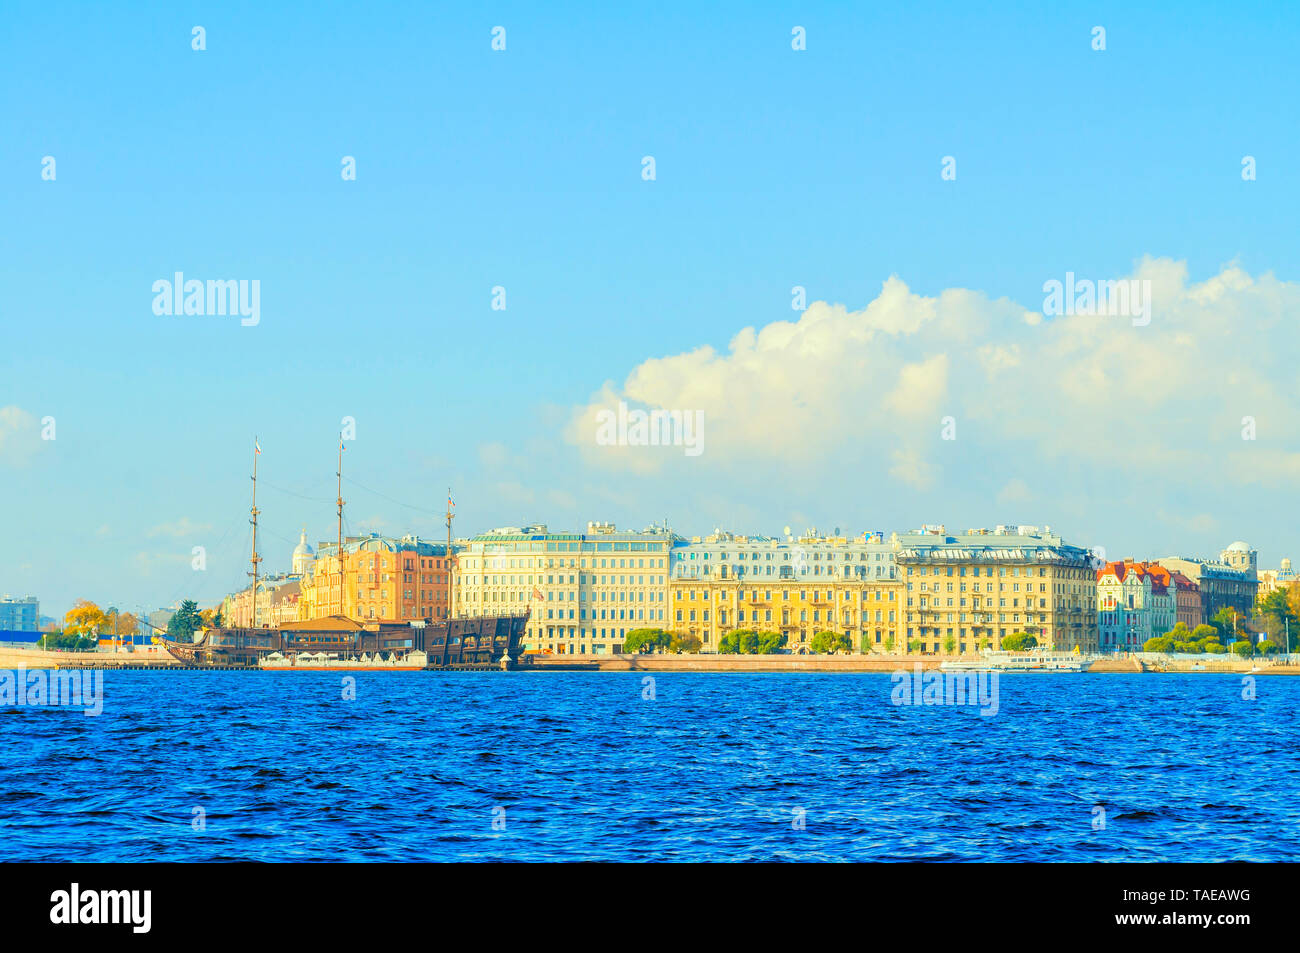 St Petersburg, Russia - October 3, 2016. Mytninskaya embankment and city buildings along the Neva river with Flying Dutchman - restaurant on the water Stock Photo